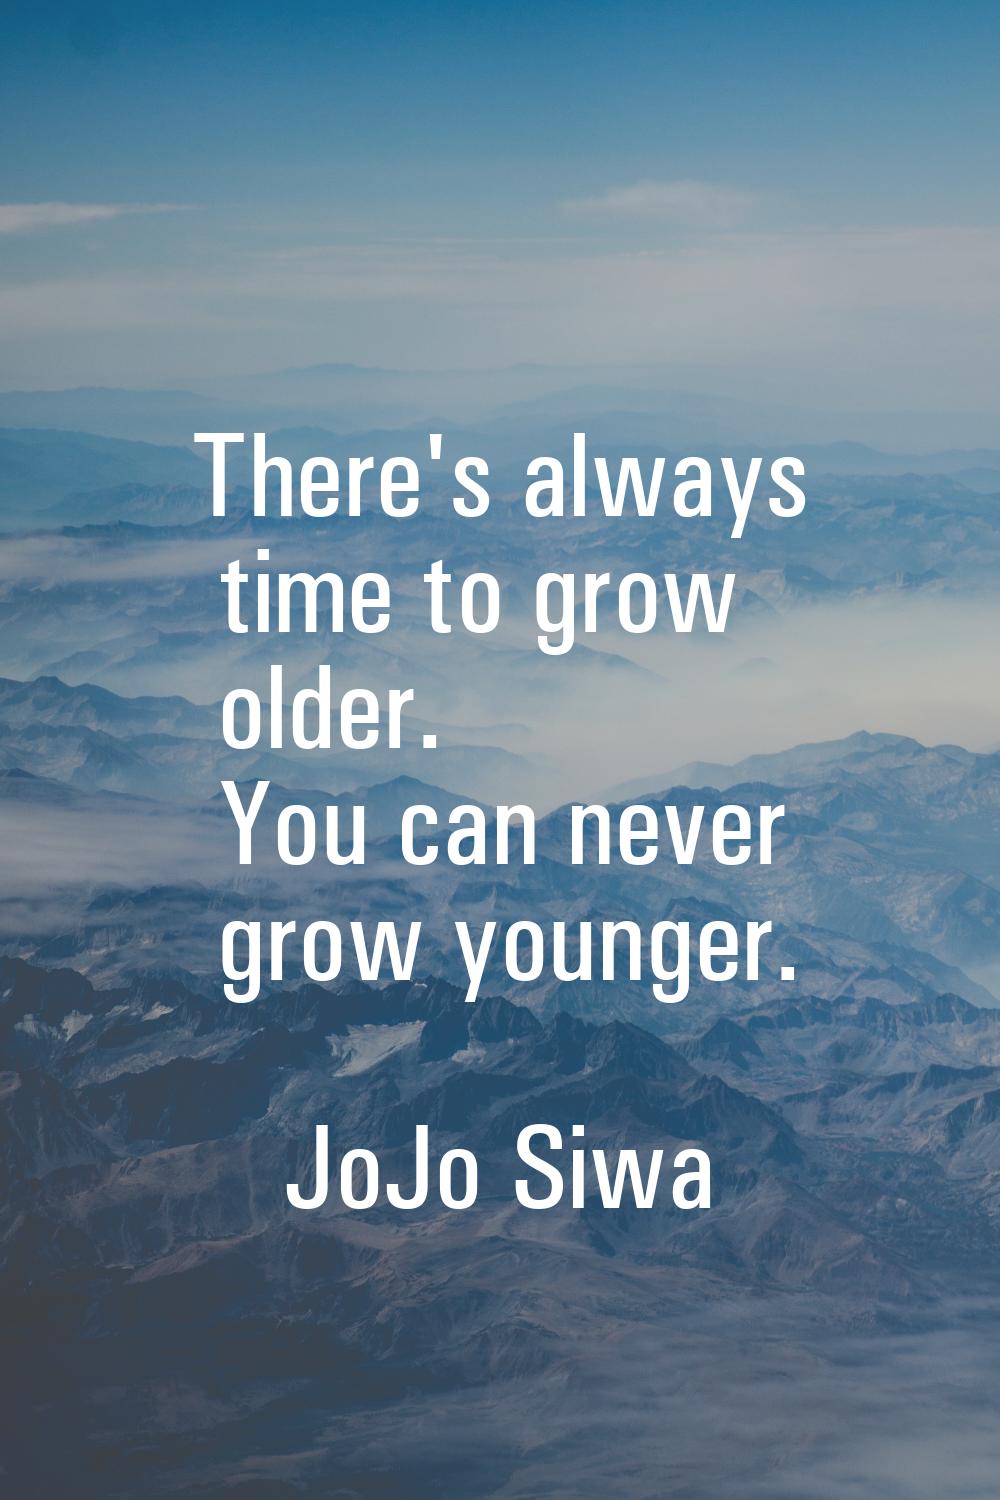 There's always time to grow older. You can never grow younger.